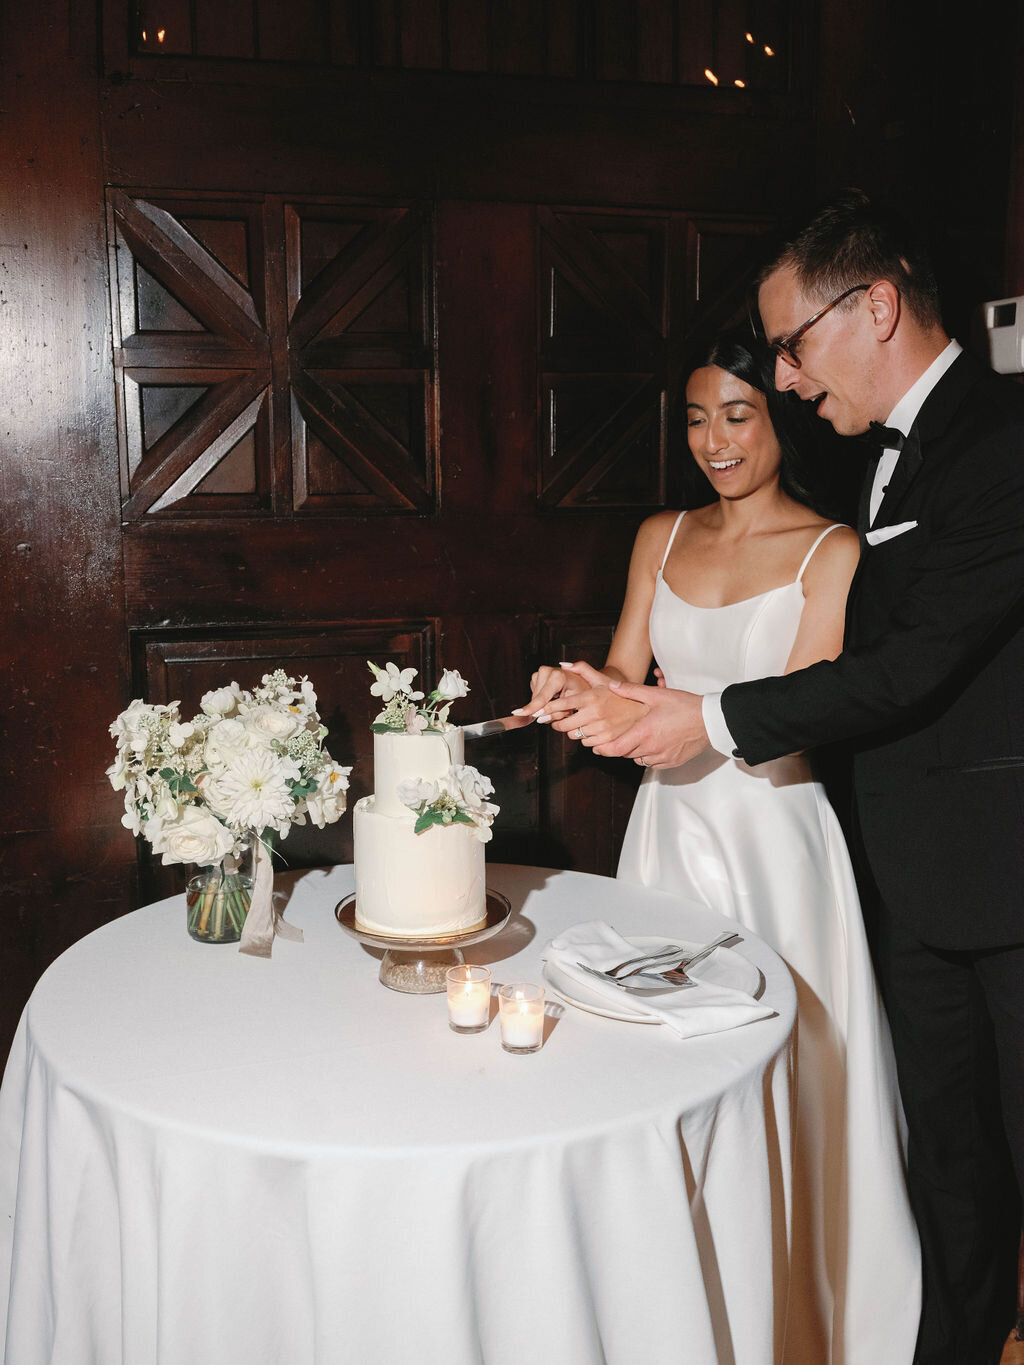 Bride and groom cutting the two-tiered white cake with white floral accents.